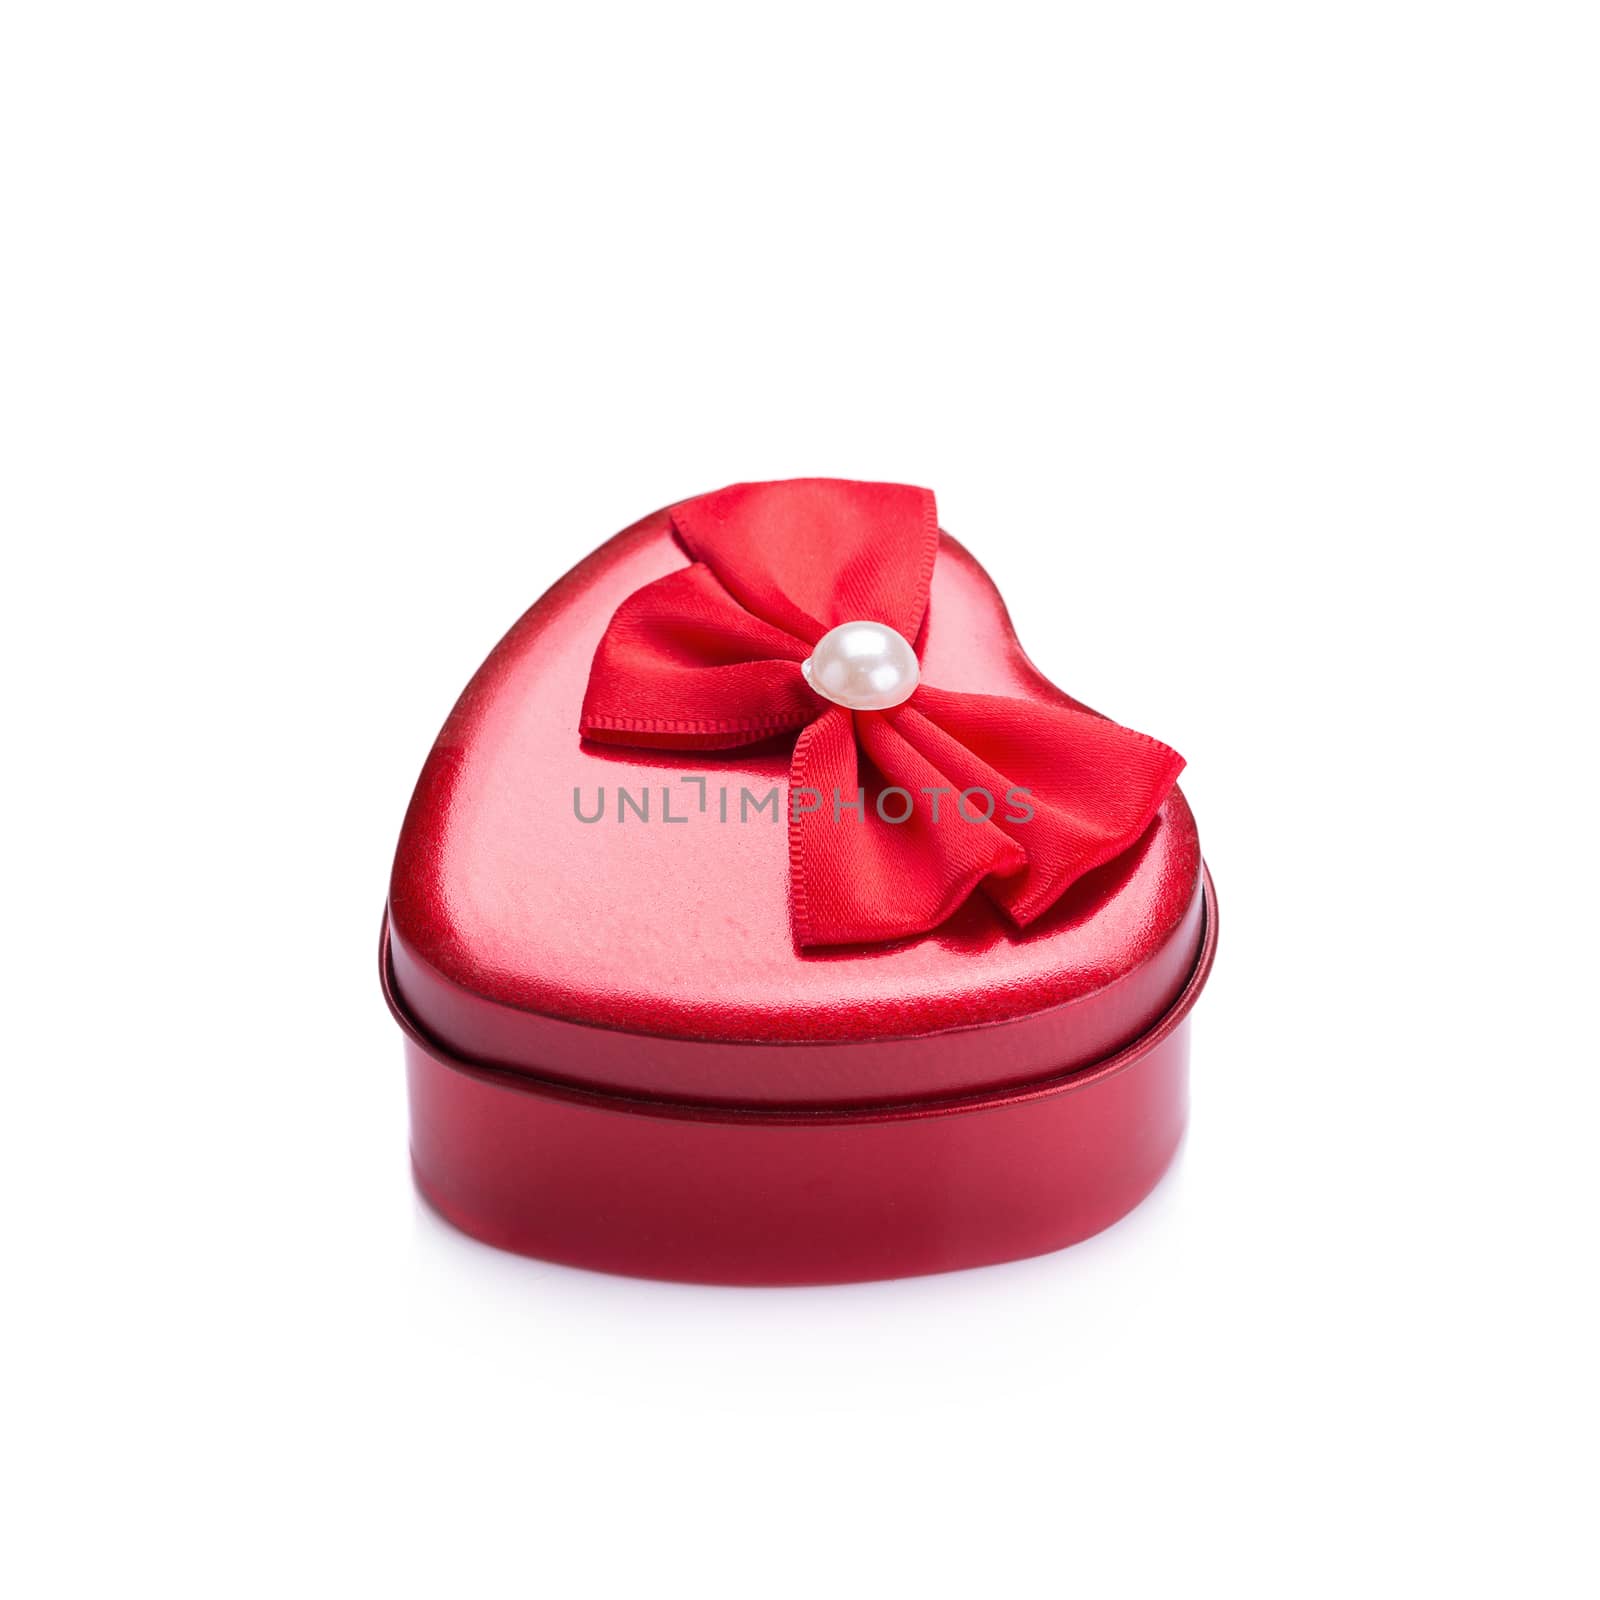 Red heart metal box on white background by kaiskynet